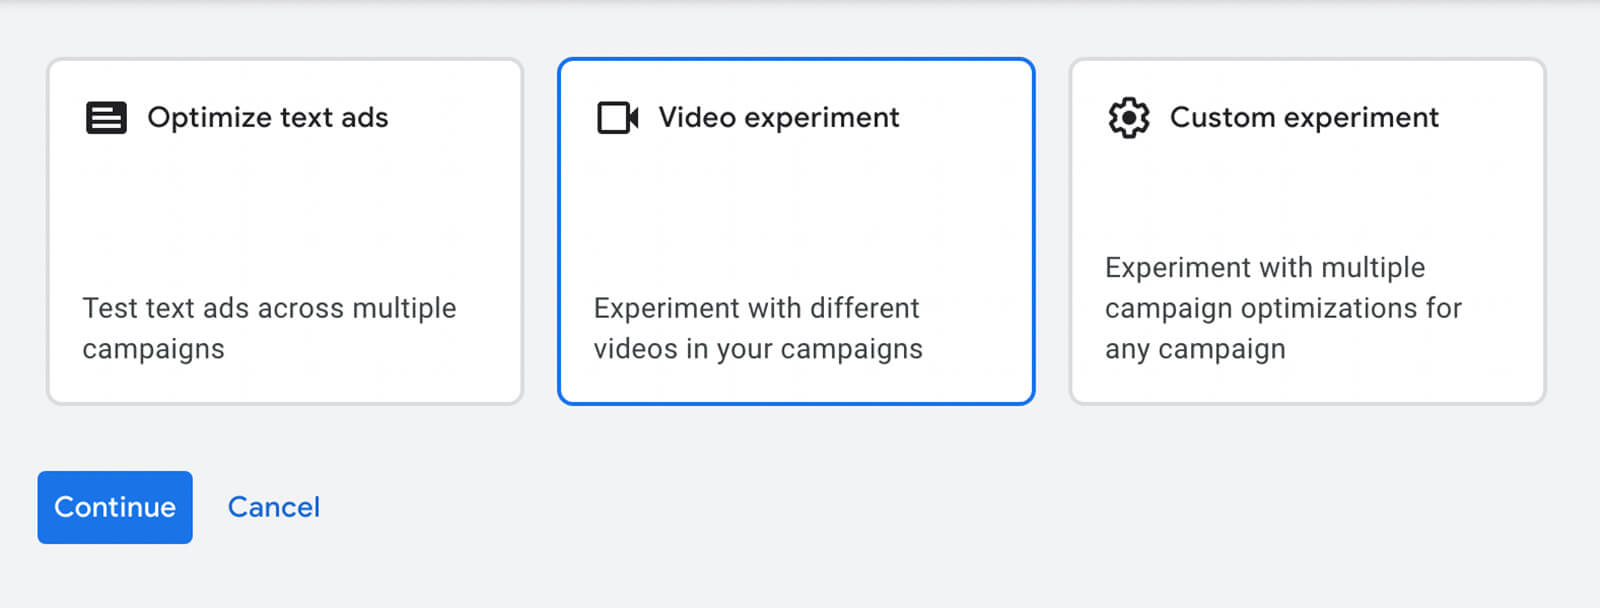 how-to-use-google-ads-experiments-tool-set-up-video-experiment-example-3